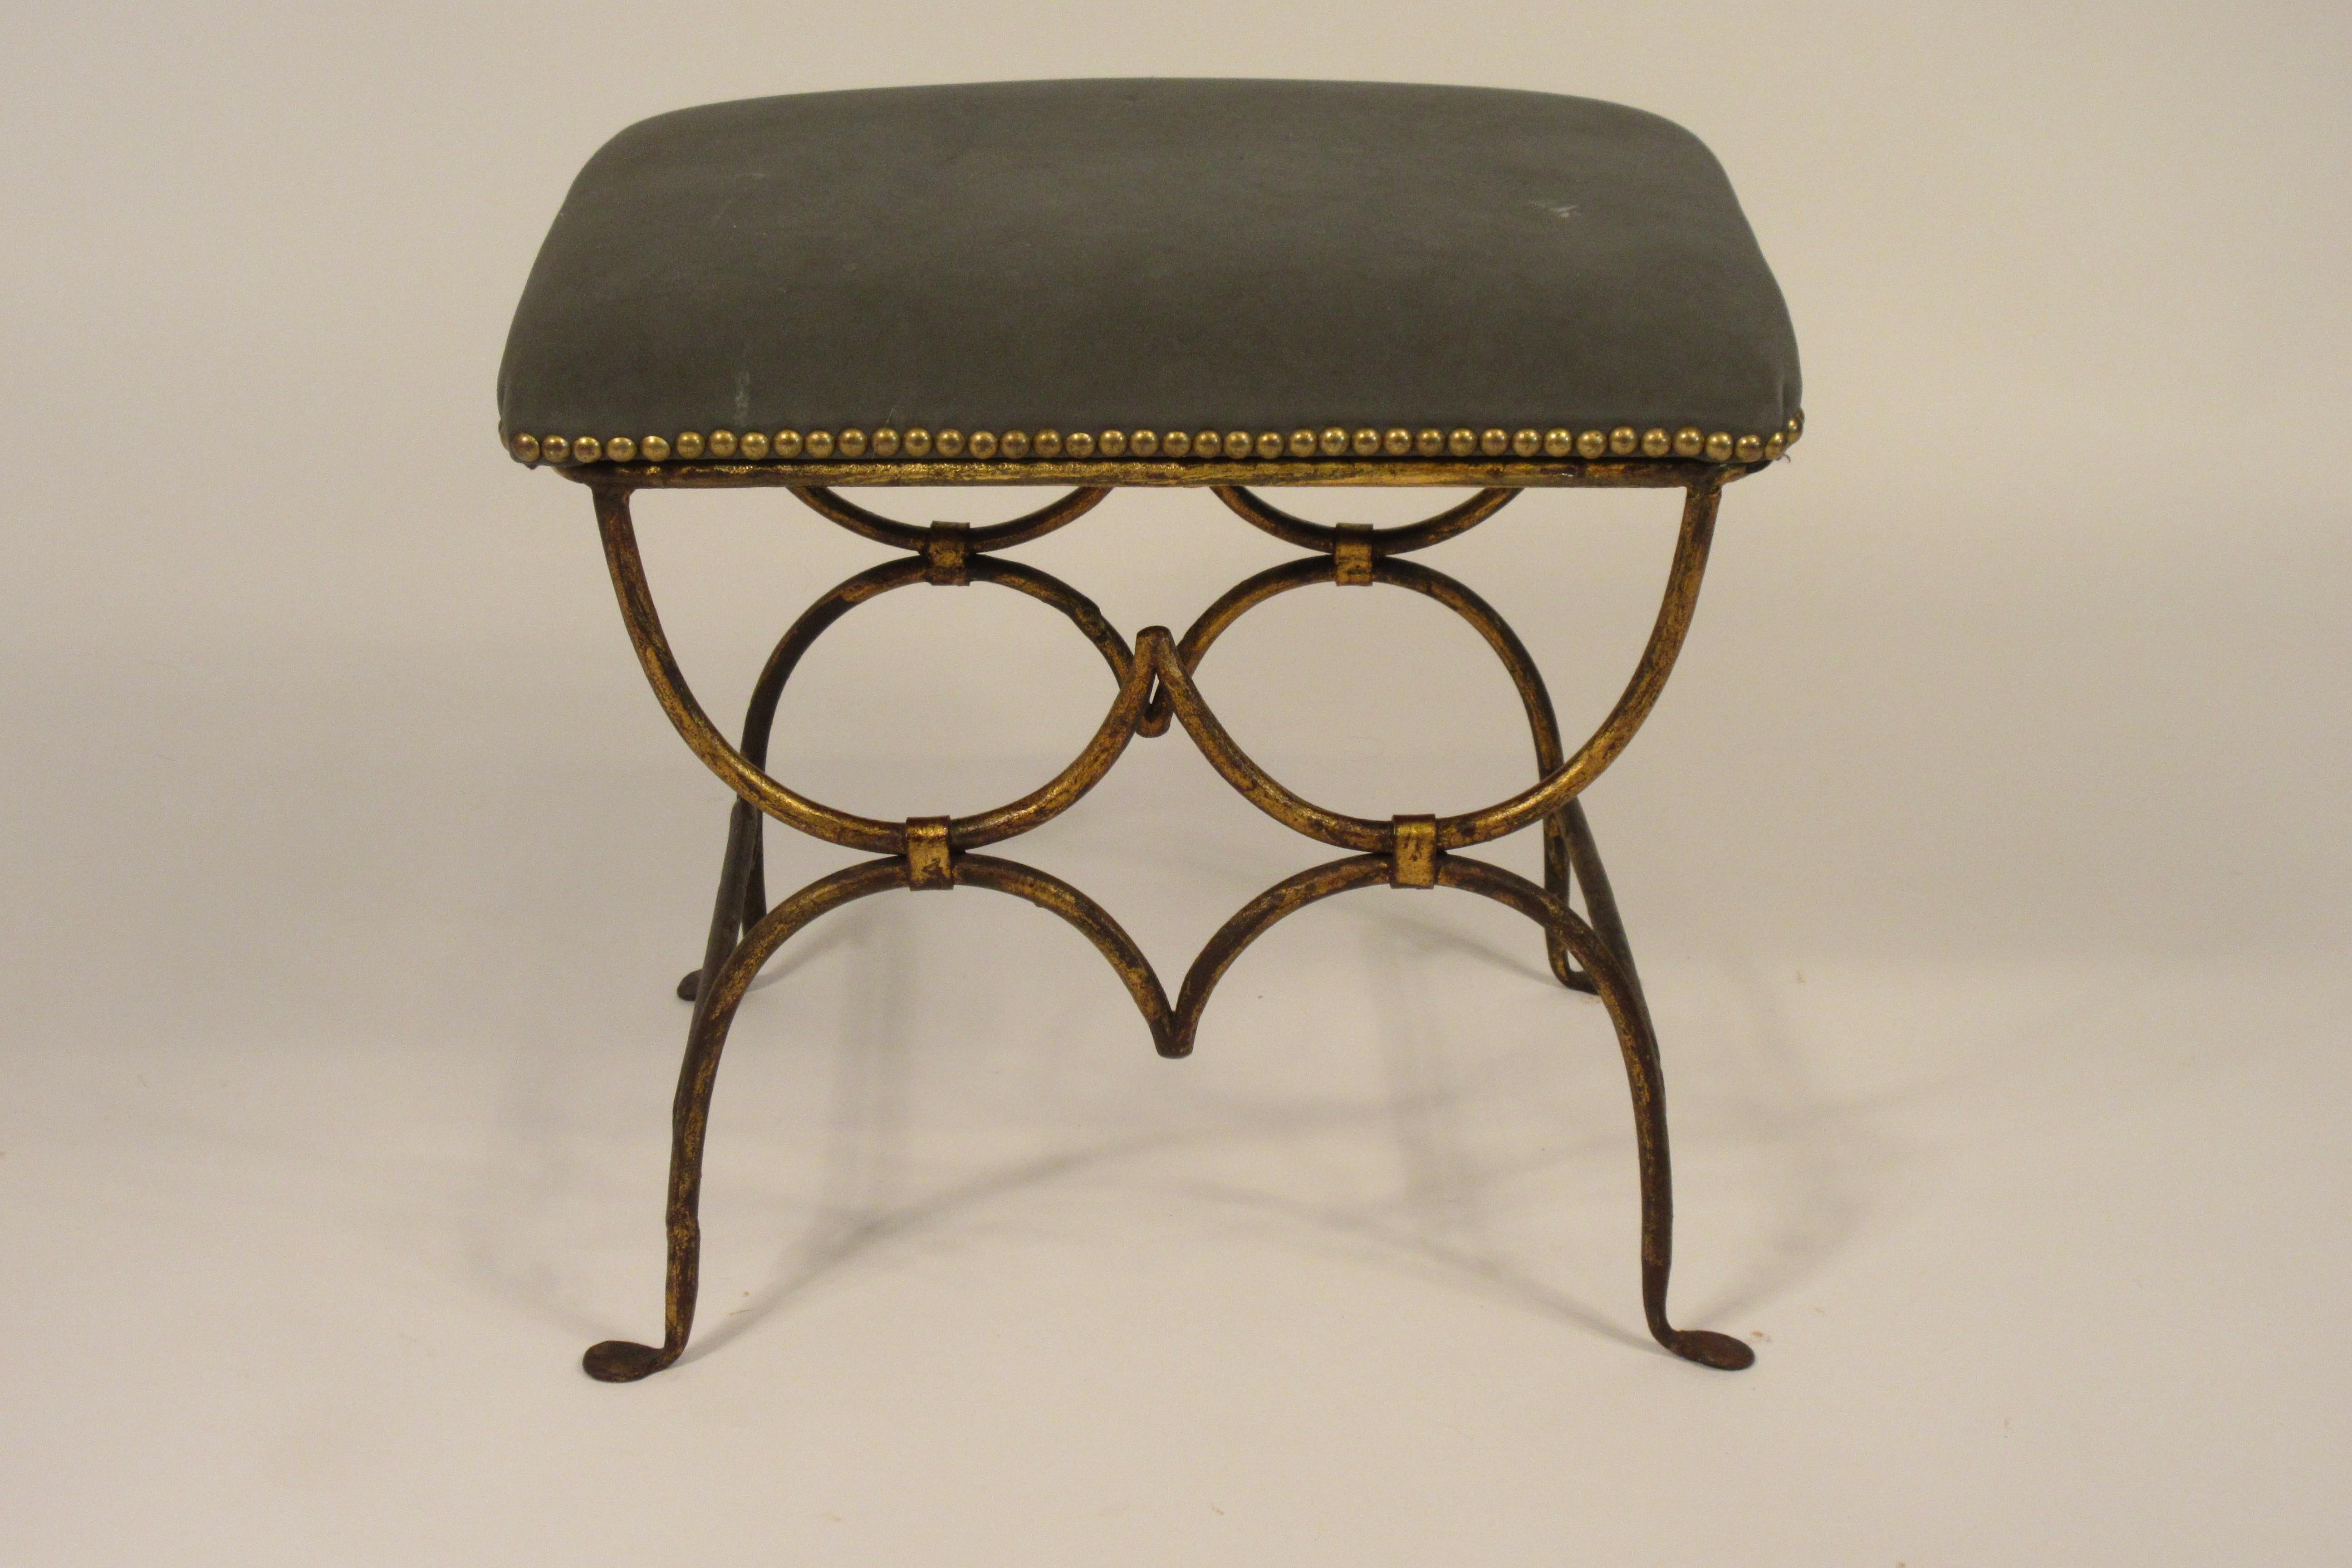 1960s Spanish gilt iron bench. Seat is not attached. Original upholstery.